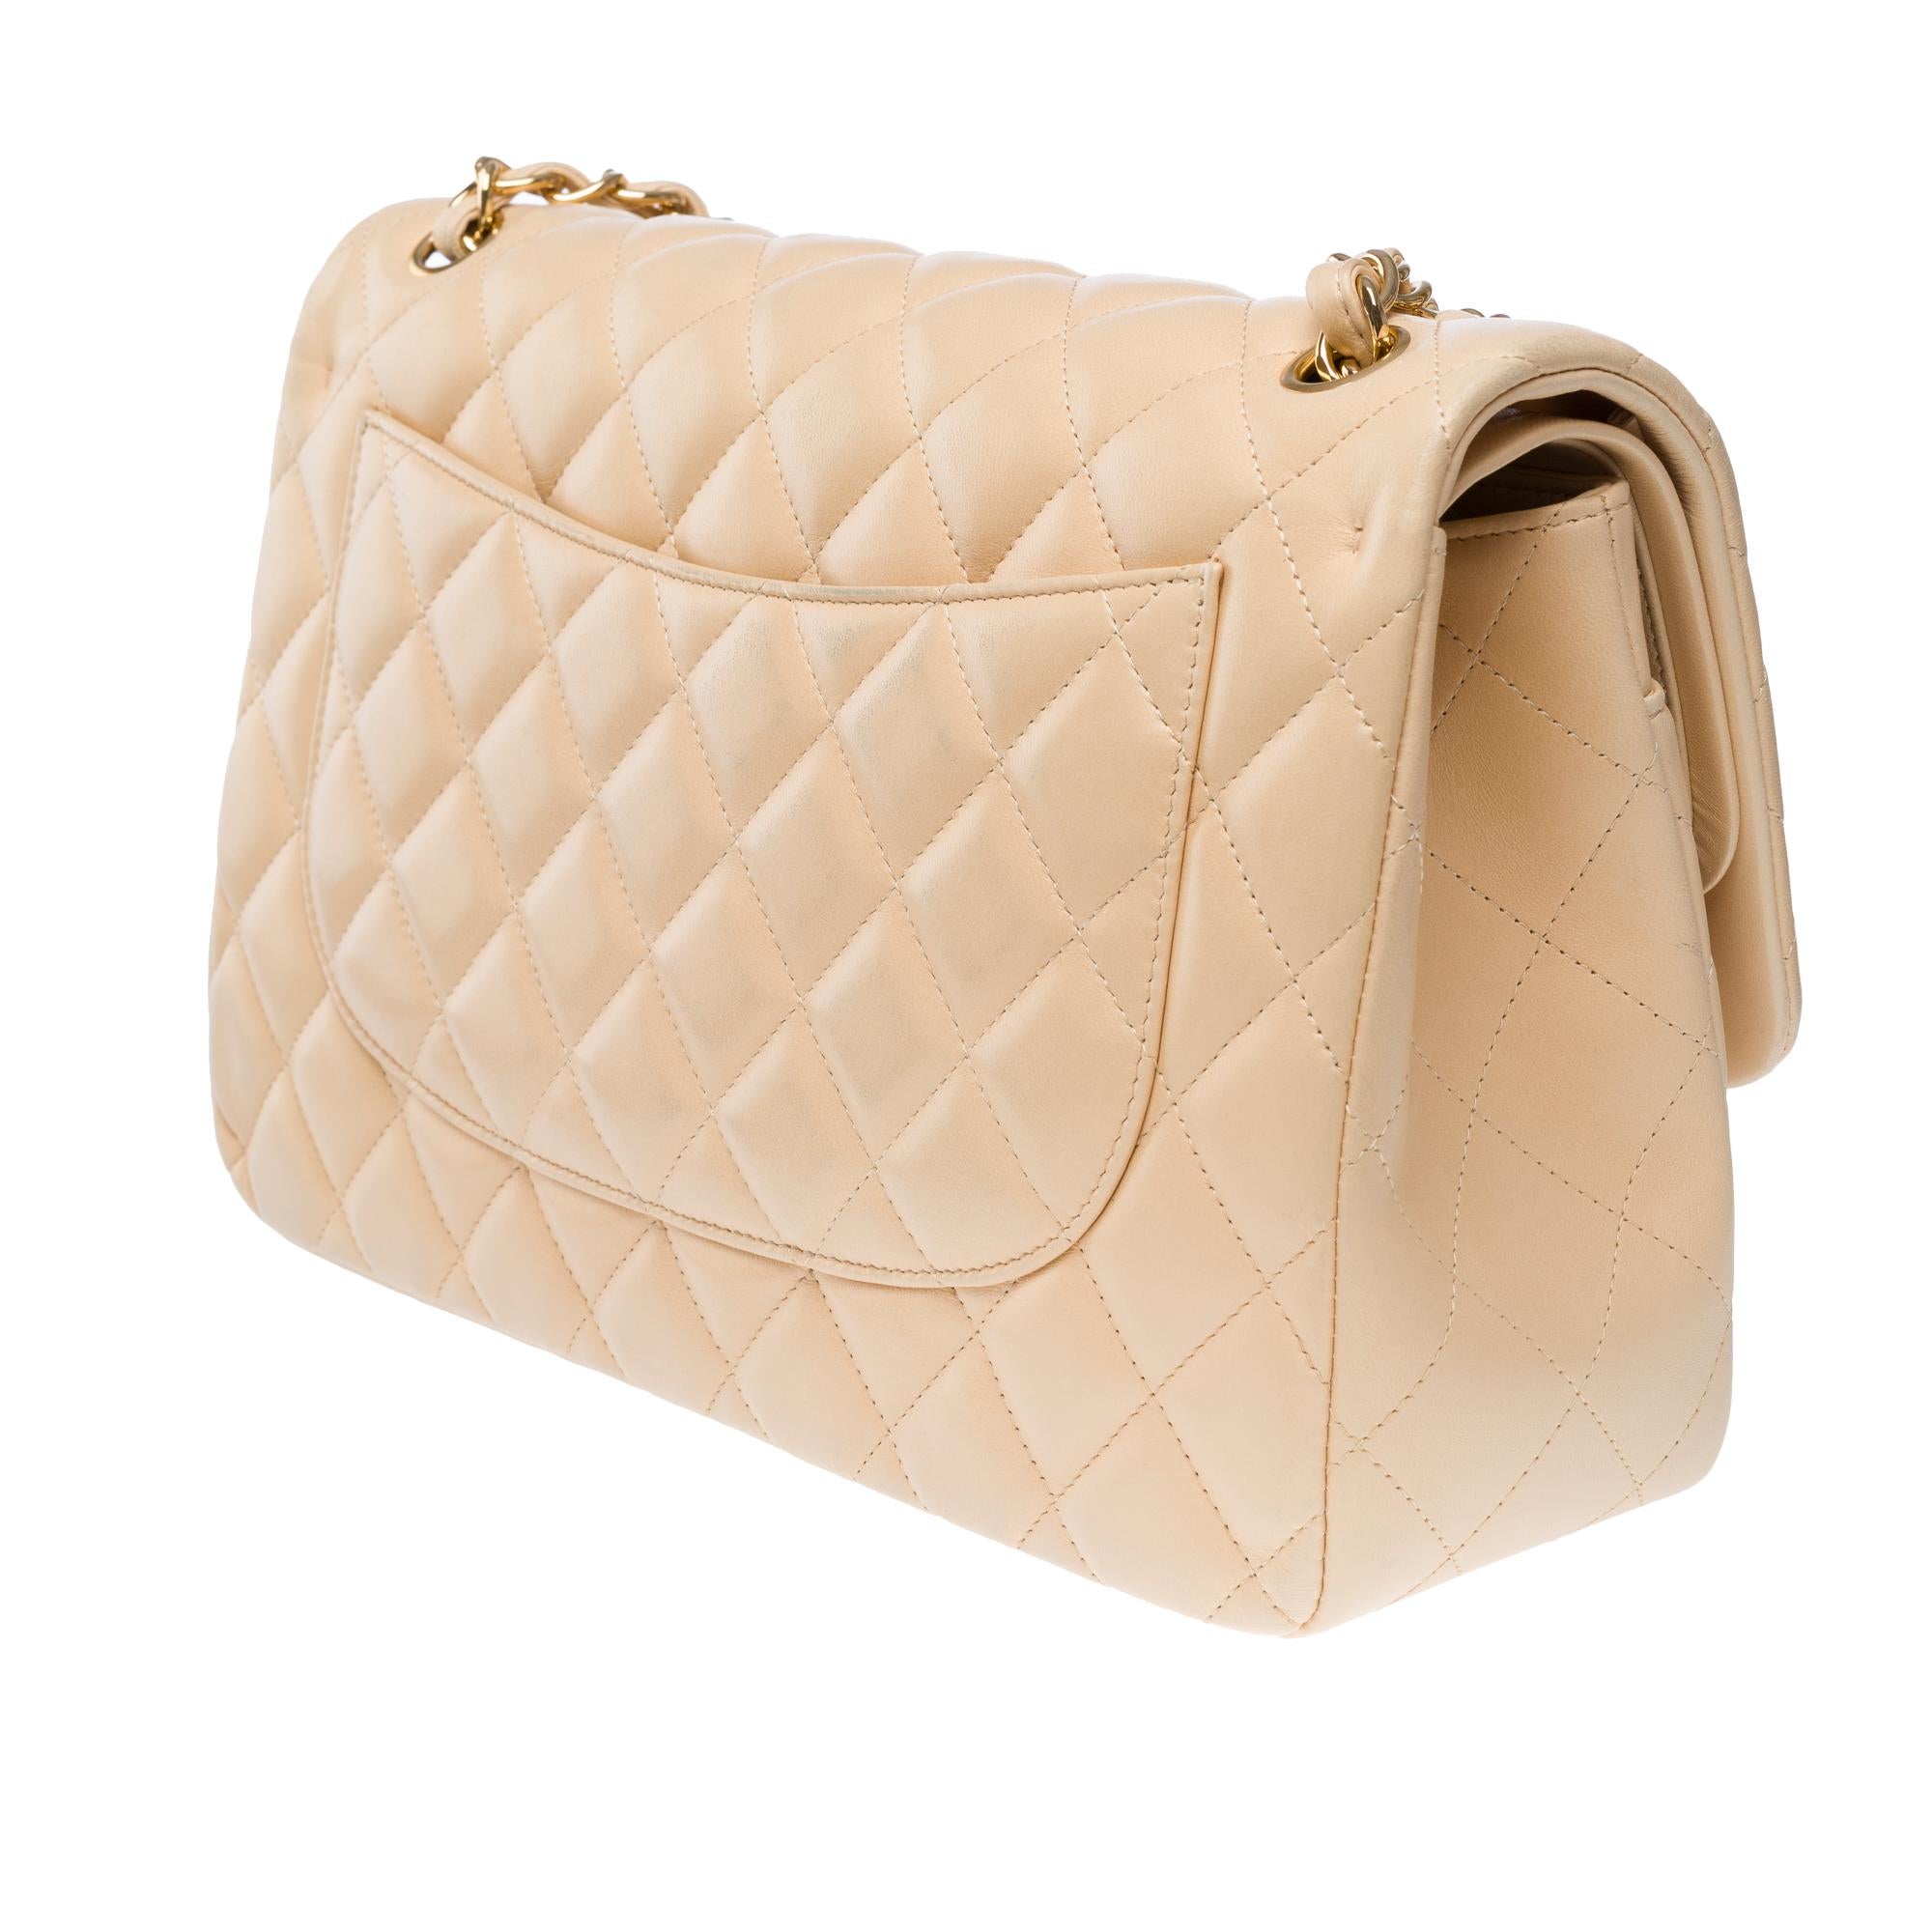 Chanel Timeless Jumbo double flap shoulder bag in beige quilted lambskin, GHW 2